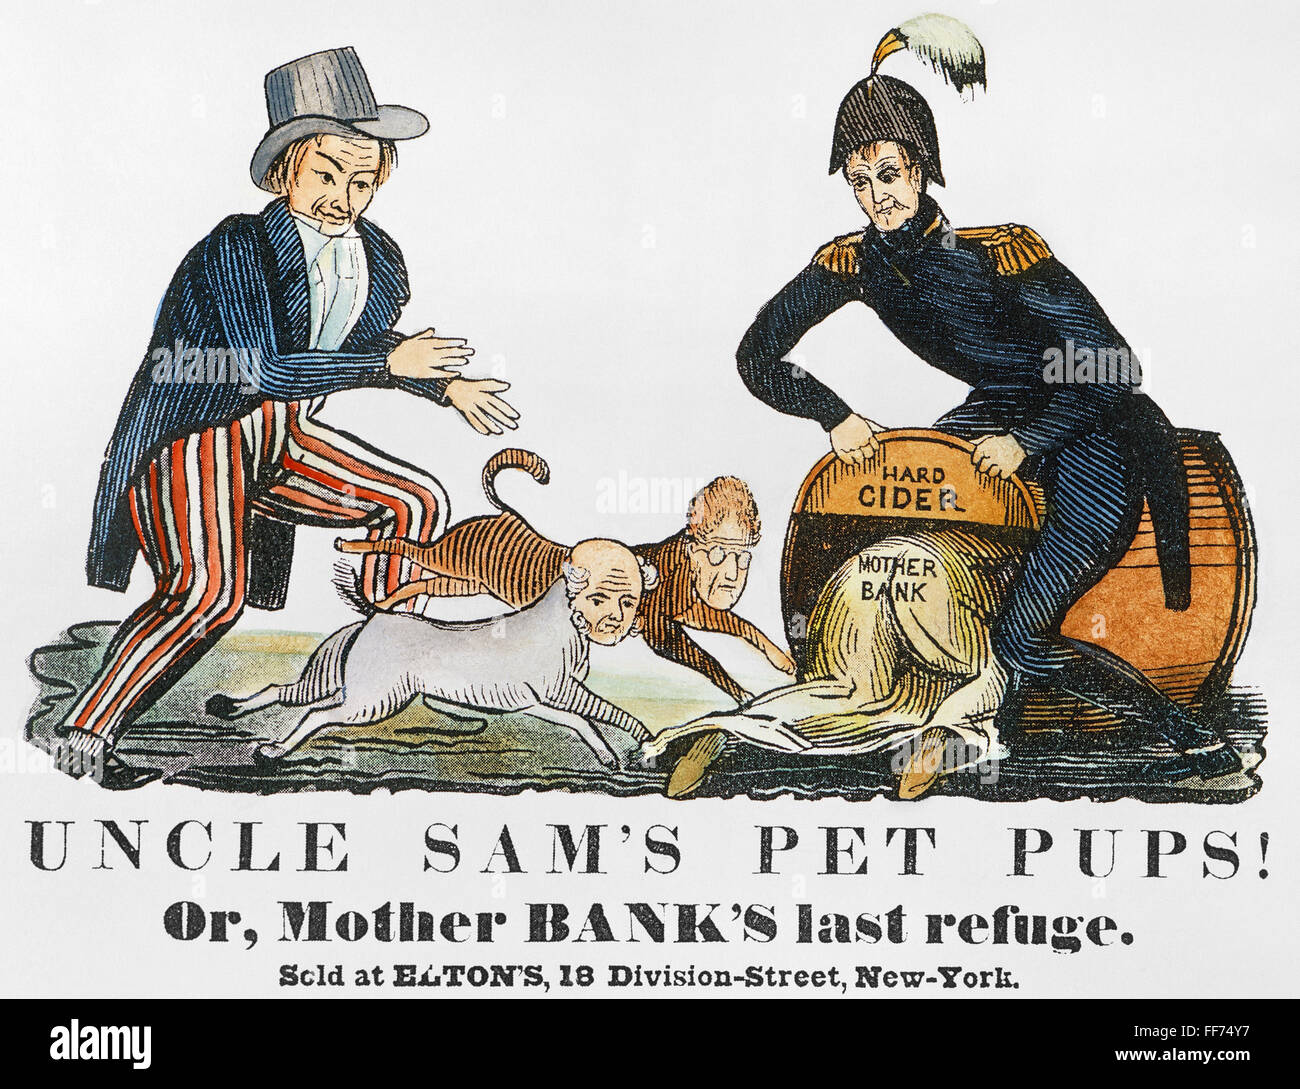 UNCLE SAM: CARTOON, 1840. /n'Uncle Sam's Pet Pups!' One of the earliest cartoon appearances (1840) of Uncle Sam and showing him chasing Andrew Jackson and Martin Van Buren into the hard cider barrel held by presidential candidate W.H. Harrison. Stock Photo